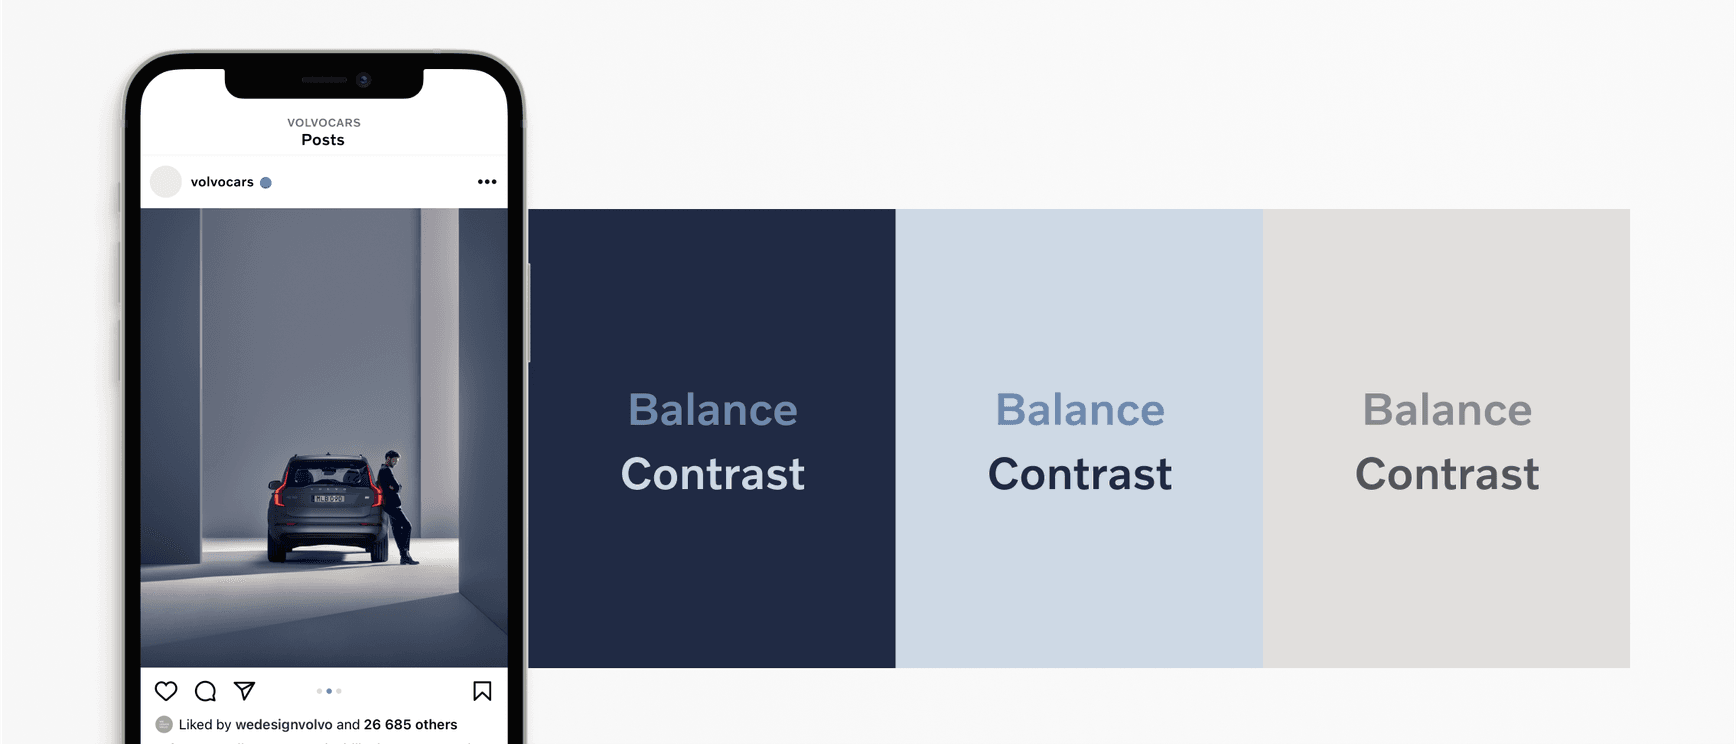 Mobile with an Instagram post layout. The image is of the XC90 in a studio and has a blue tonality. Side by side there are 3 examples of which colours to use together to create balance and contrast. The first example is the darkest blue as a background together with the lightest blue for a contrast and the slightly darker for the balance. Example 2 is using the lightest blue as a background and the darkest as contrast and a lighter for balance. The third example in using the lightest grey together with the darkest for contrast and a lighter grey for balance.